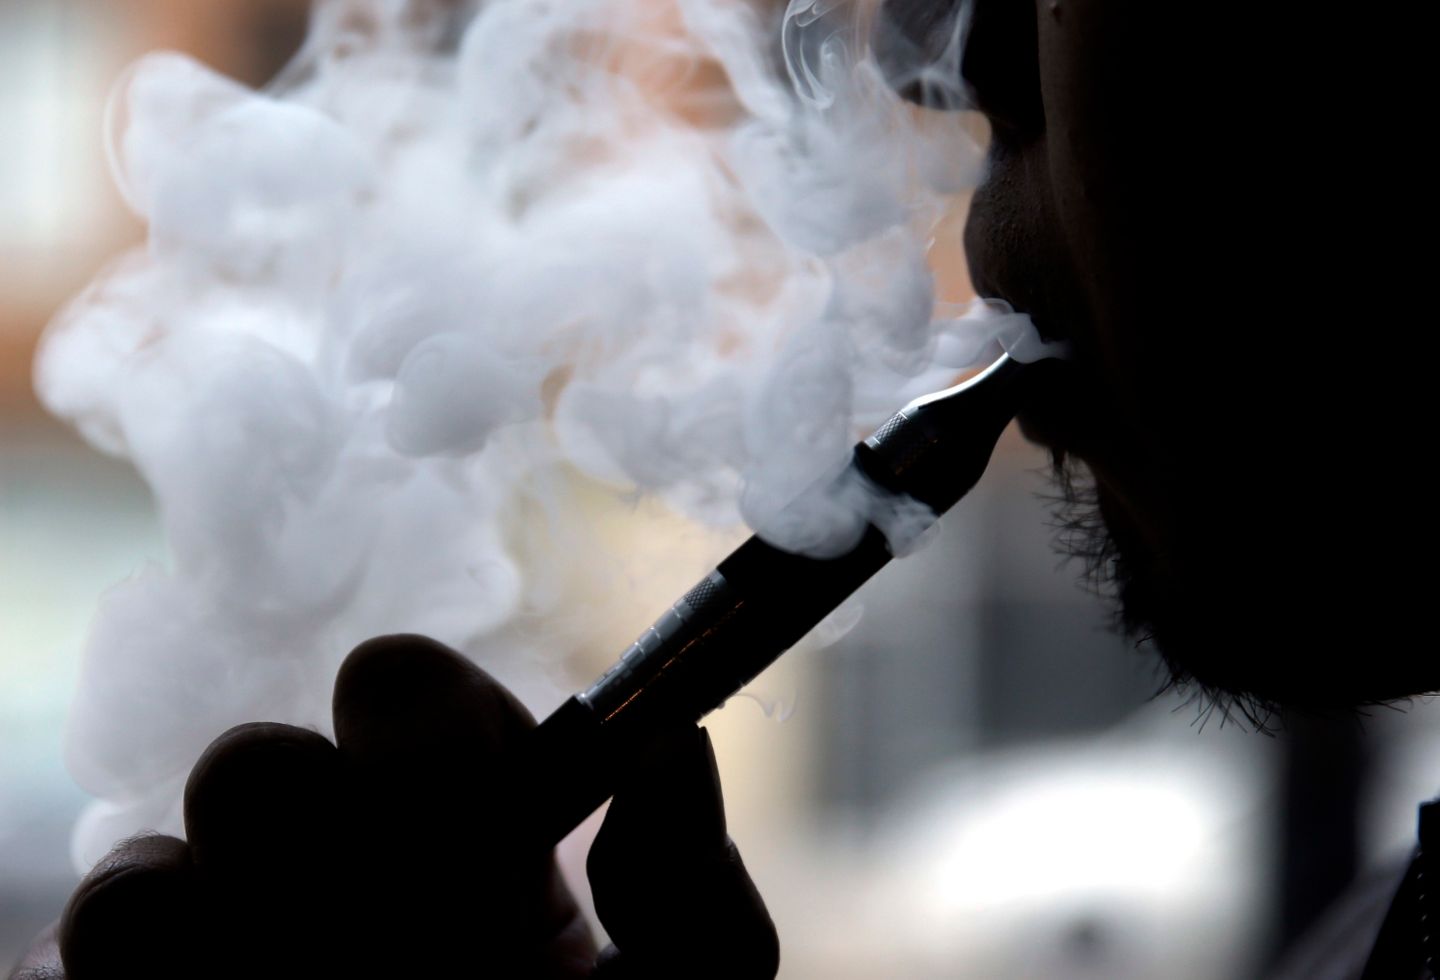 Vaping among Canadian teens spikes by 74 per cent in one year study suggests